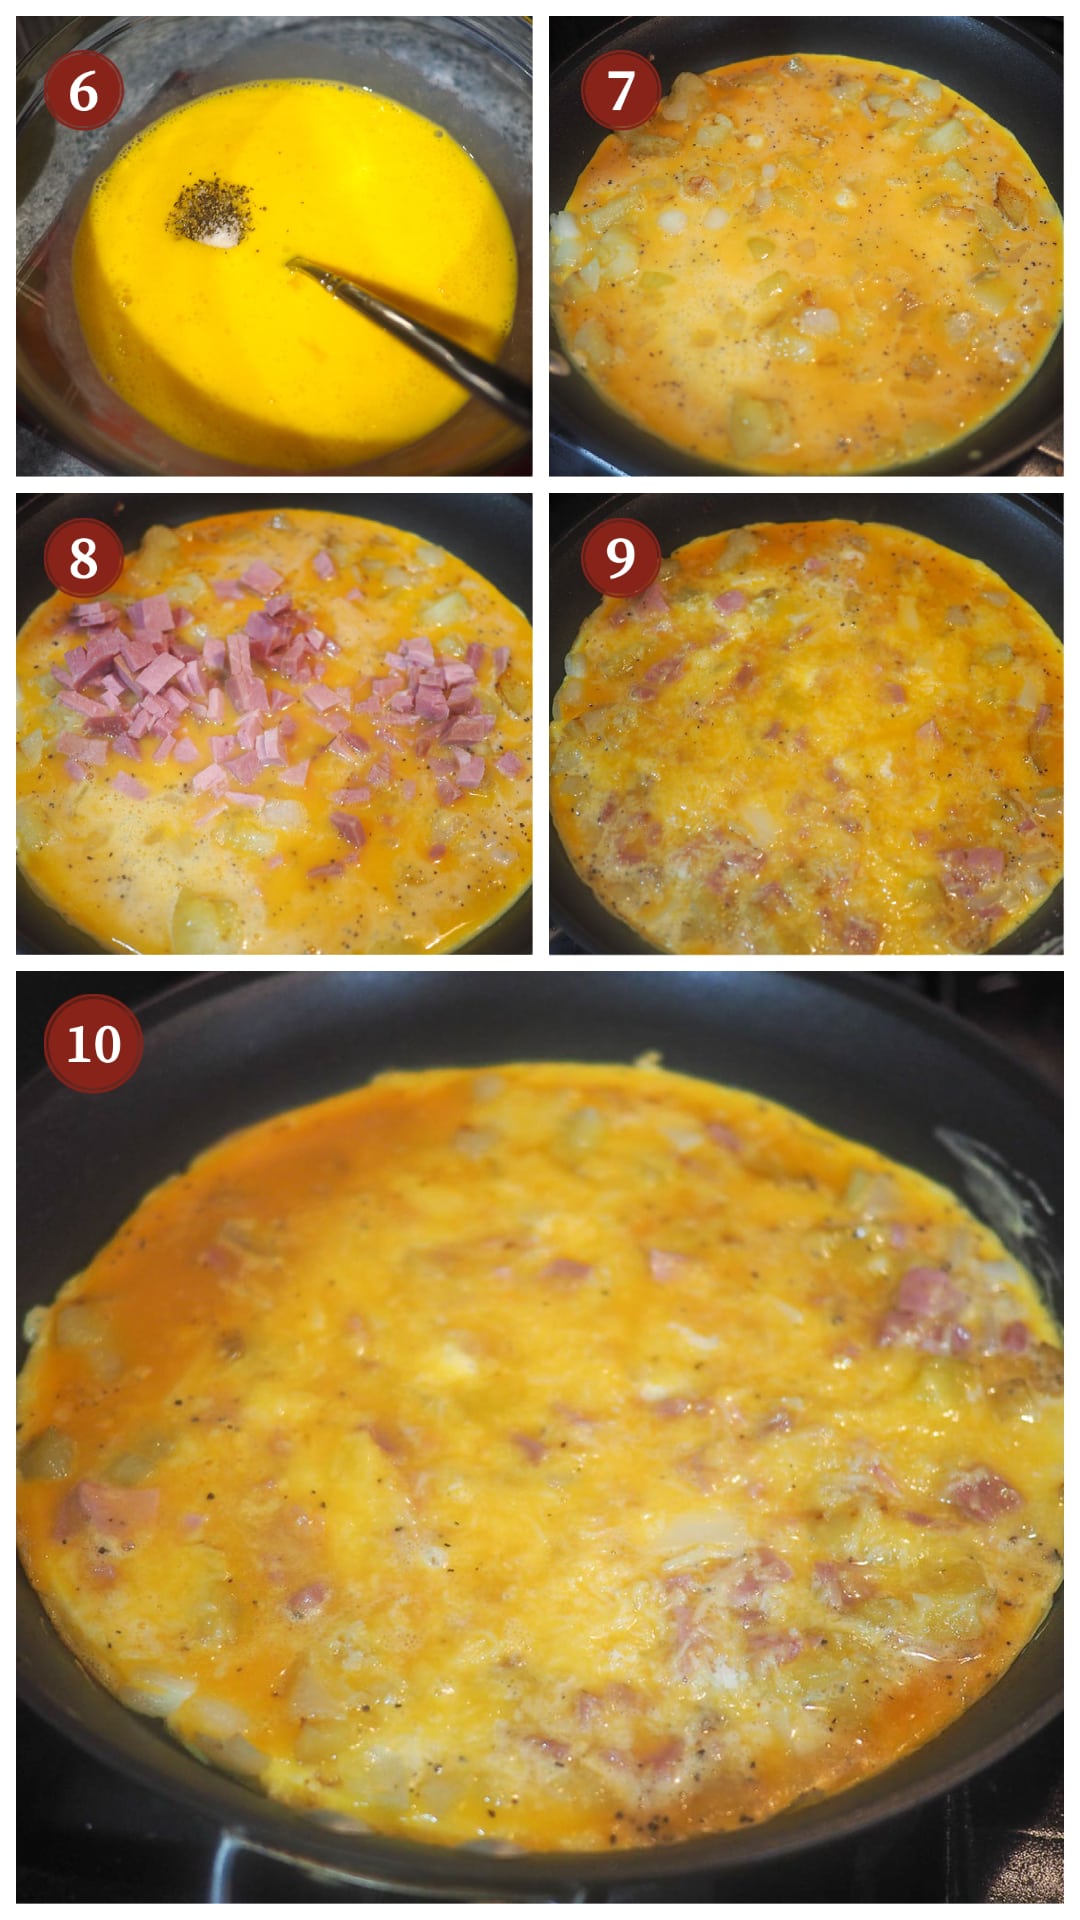 A collage of images showing how to make a ham and cheese frittata, steps 6 - 10.